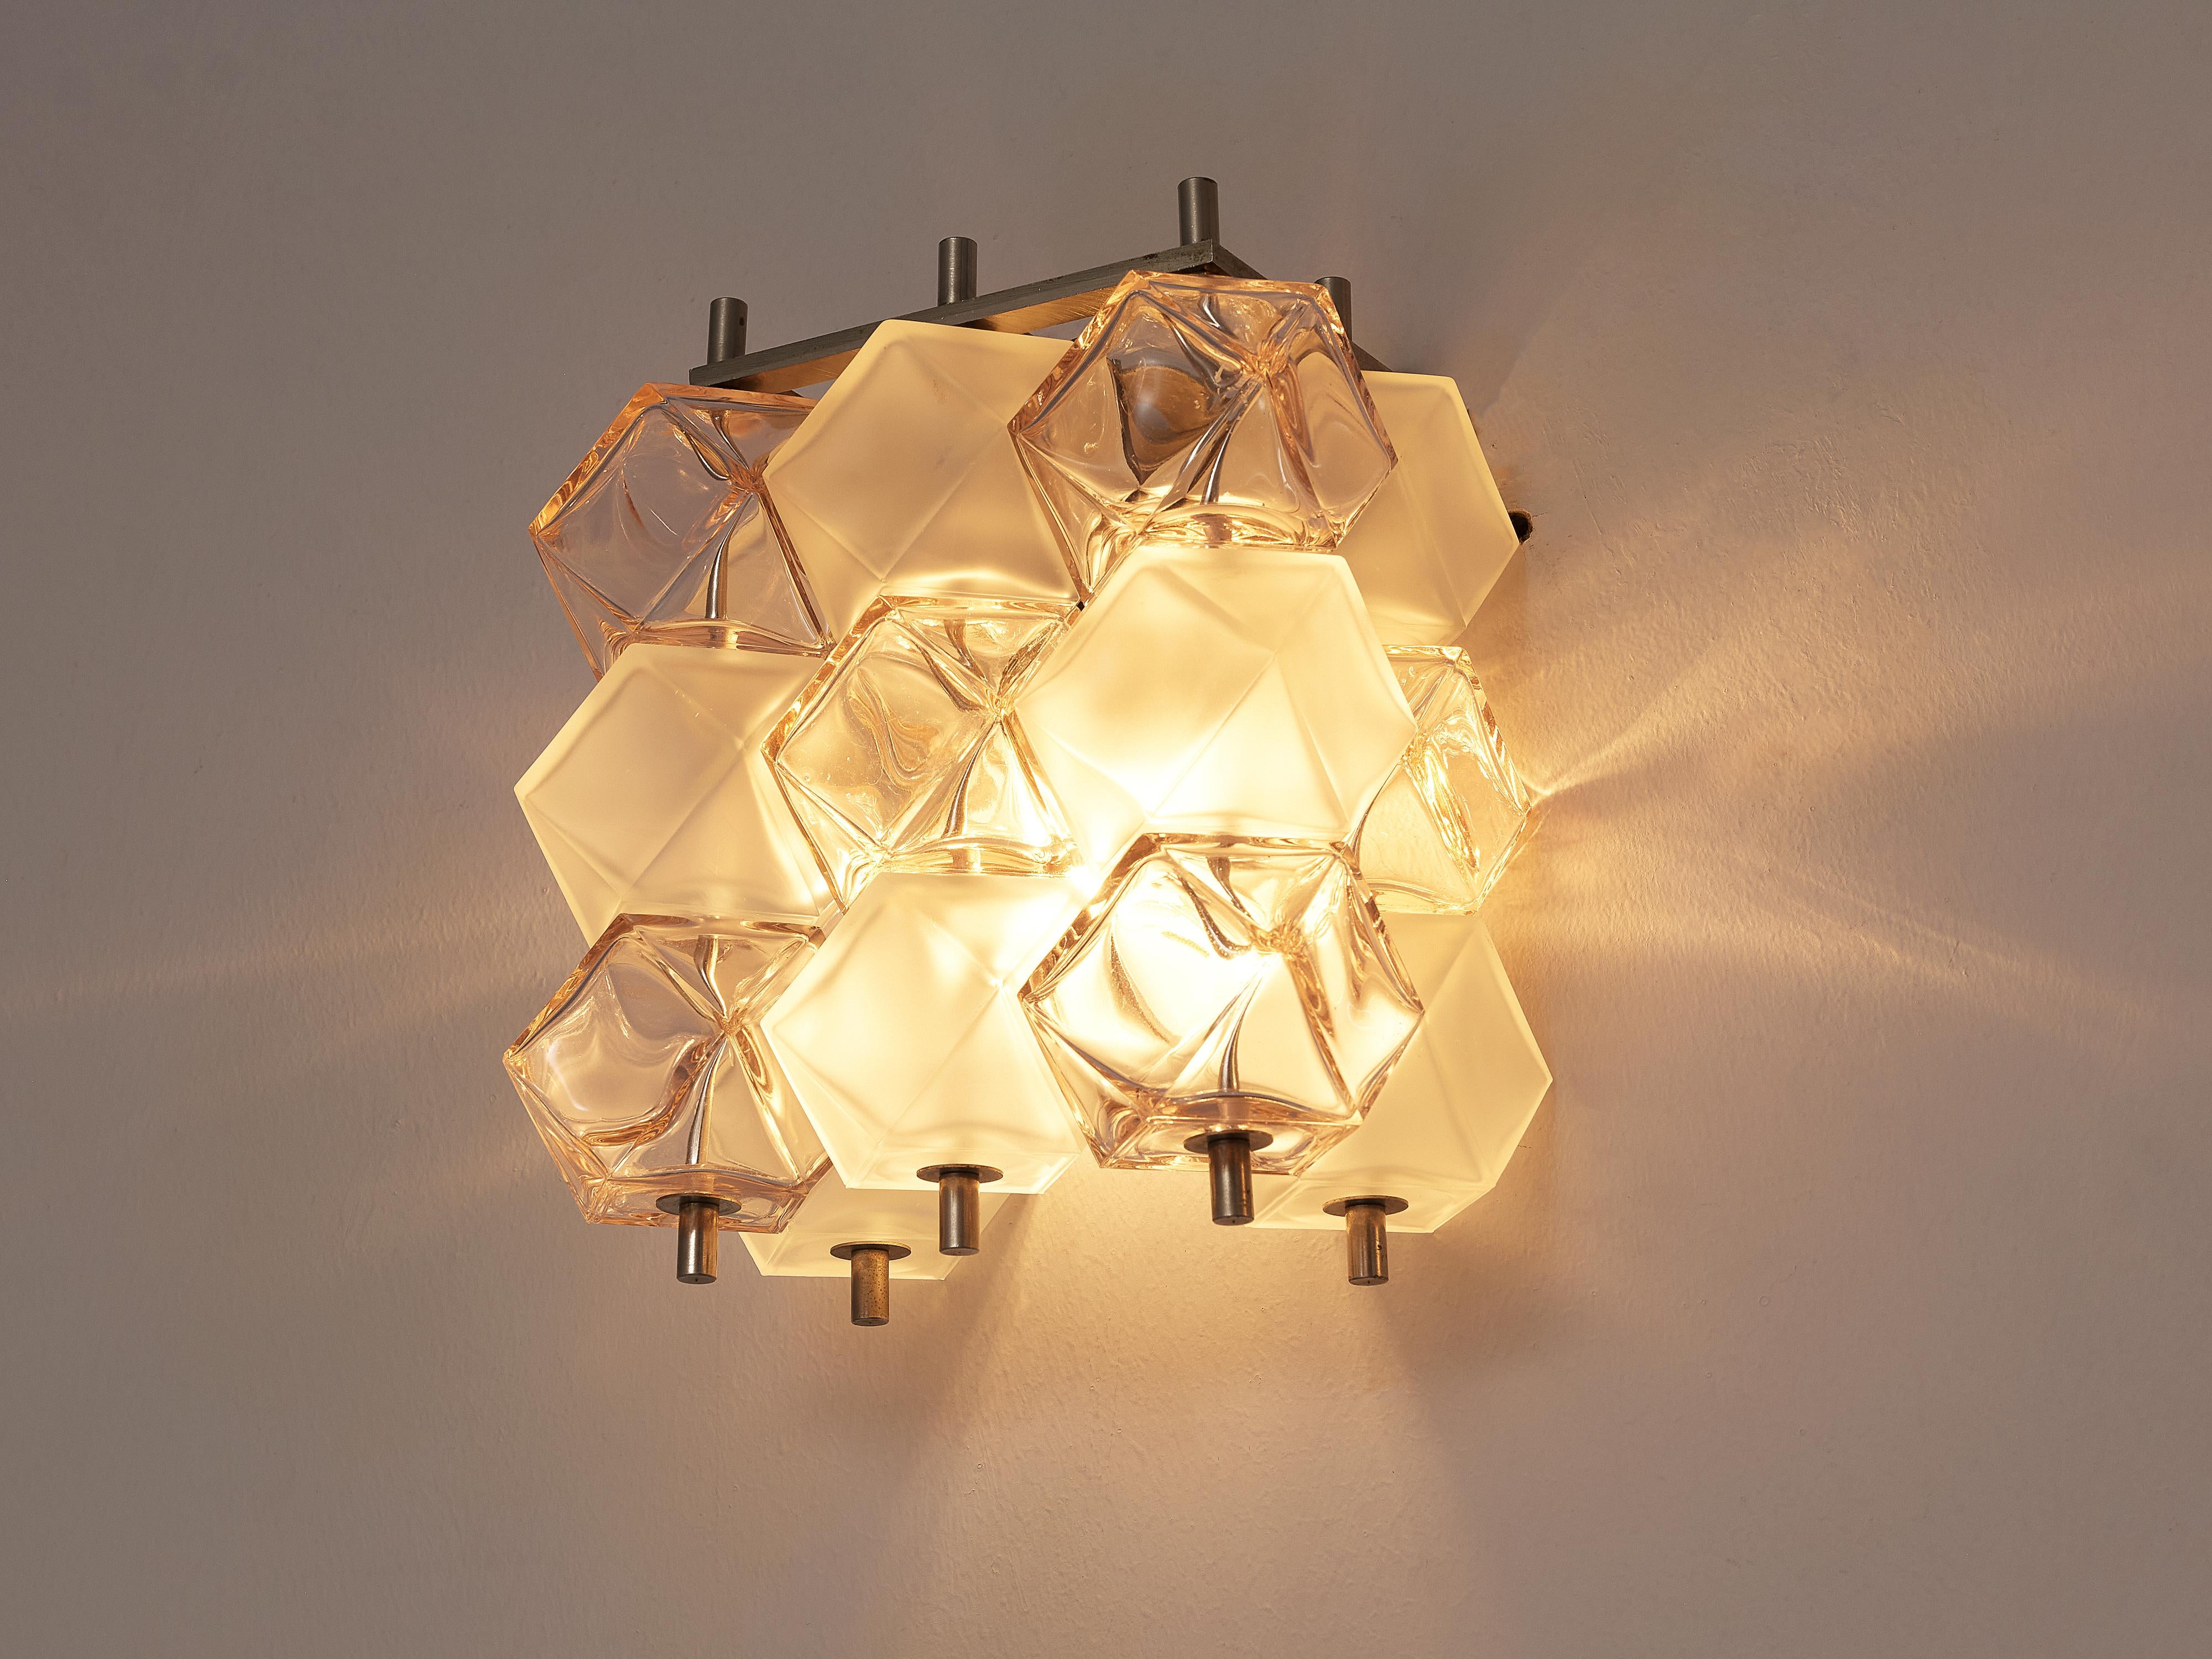 Late 20th Century Postmodern Pair of Wall Lights in Bicolored Glass Cubes